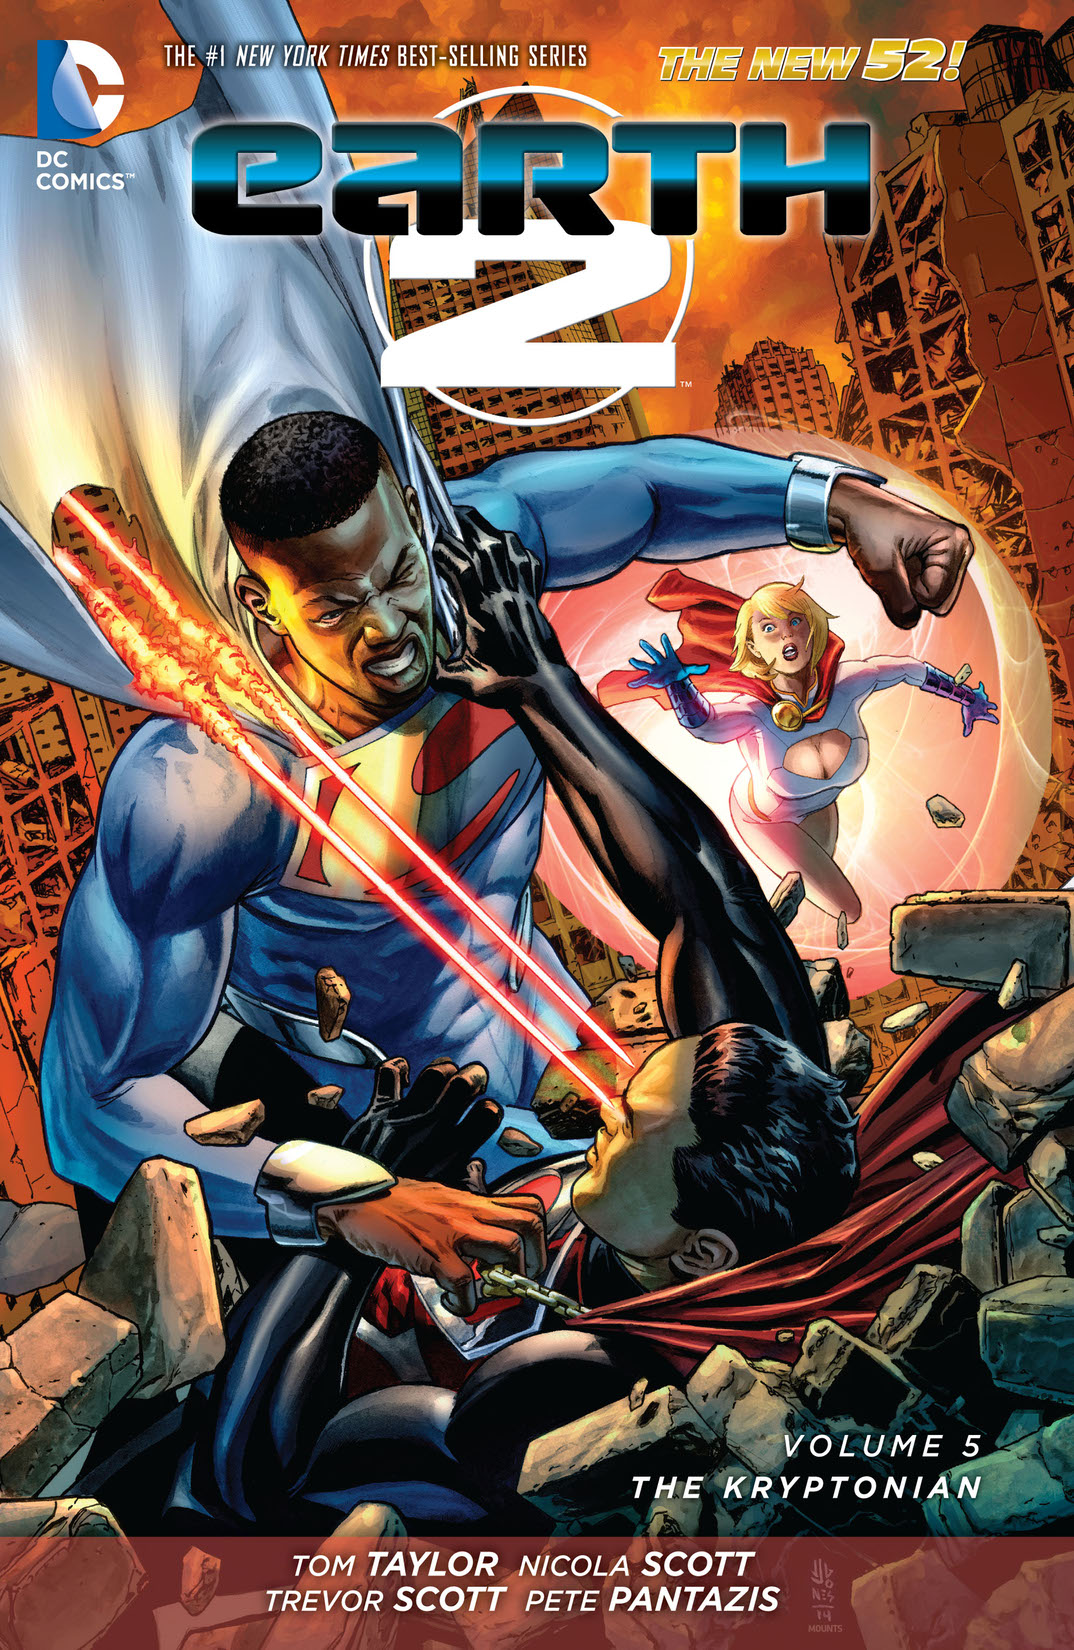 Earth 2 Vol. 5: The Kryptonian preview images